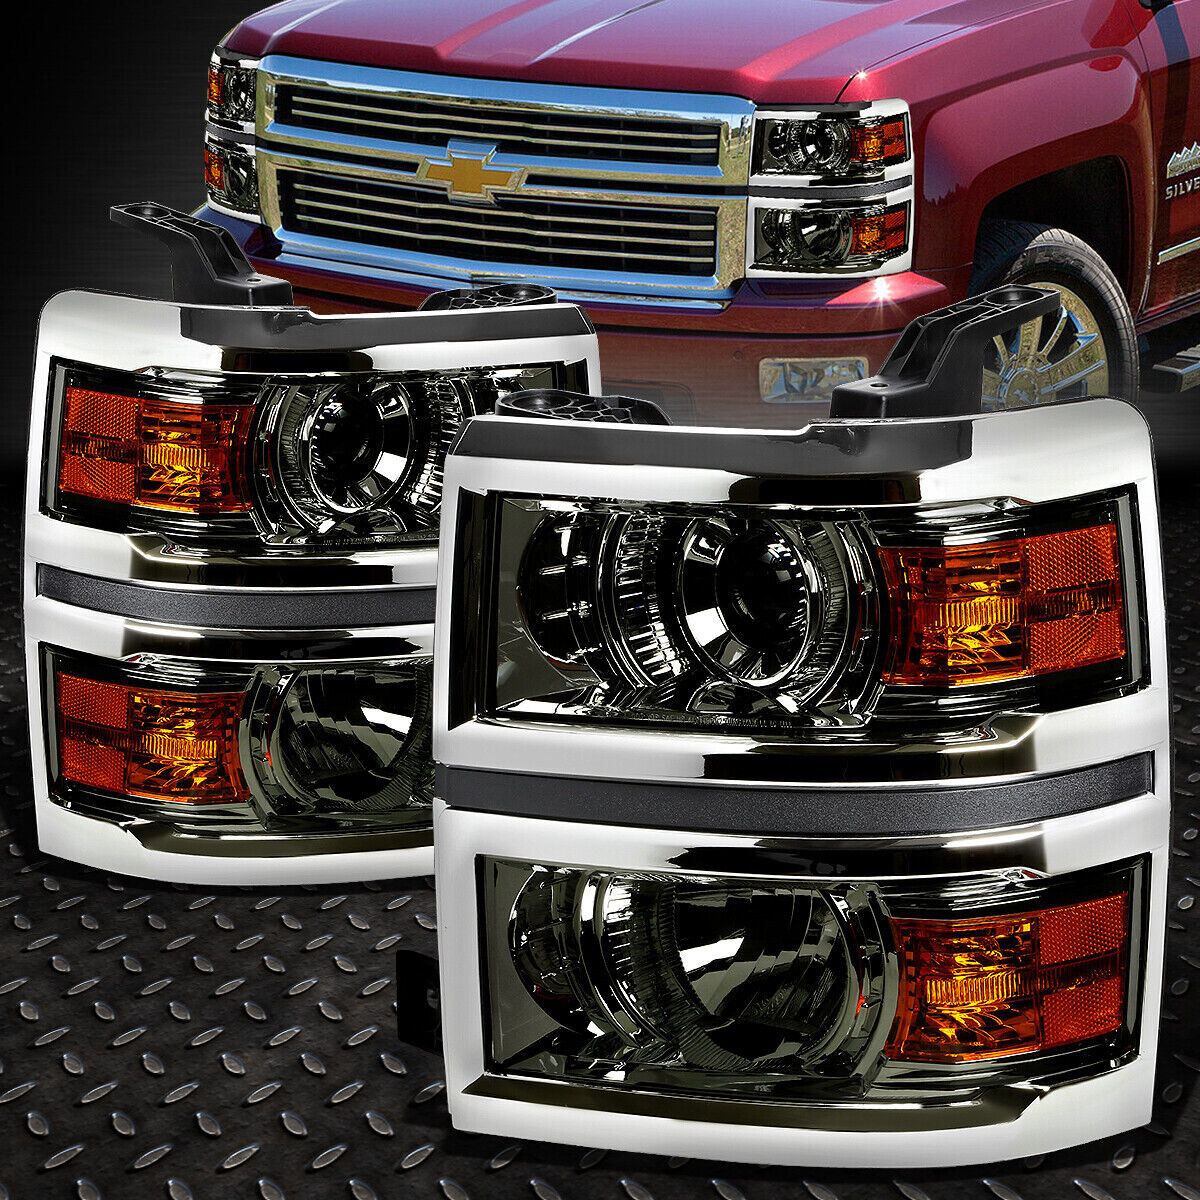 FOR 2014-2015 CHEVY SILVERADO SMOKED HOUSING AMBER SIDE PROJECTOR HEADLIGHT/LAMP